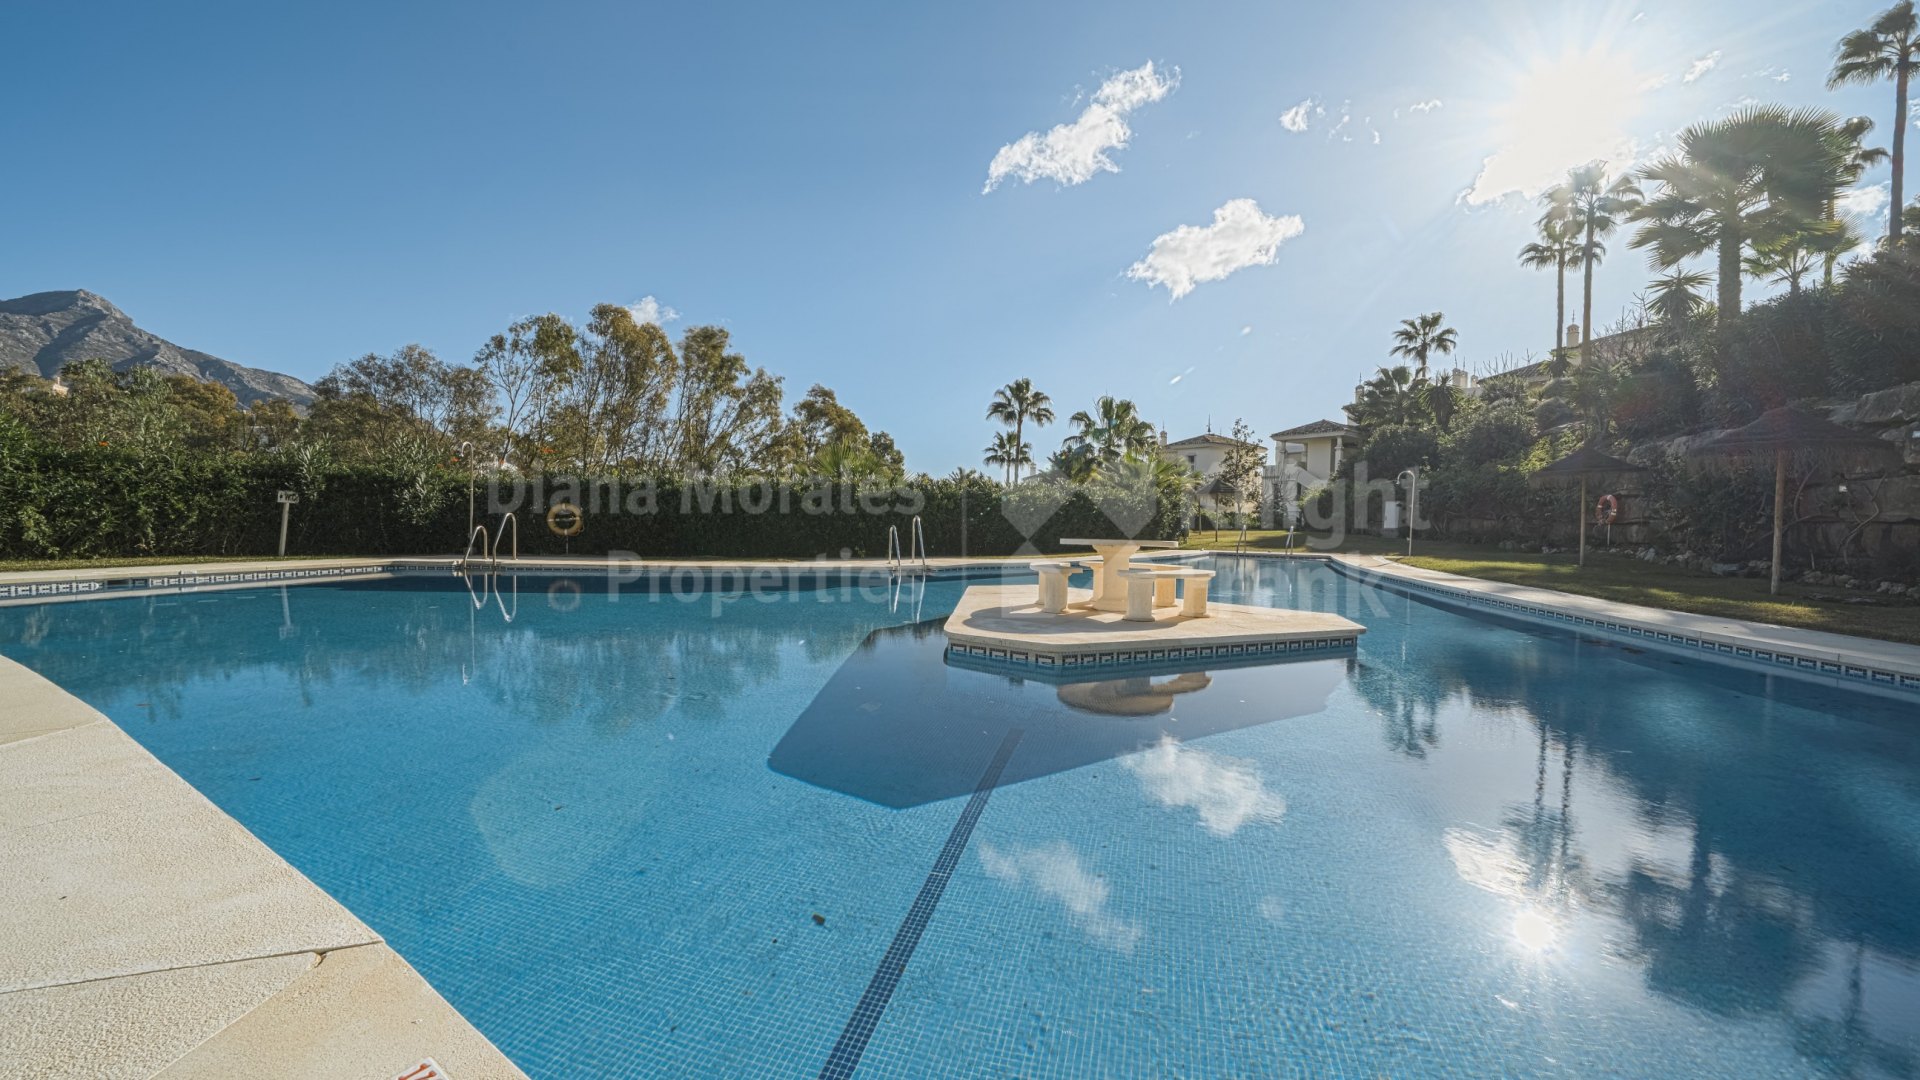 Palacetes Los Belvederes, La Cerquilla 2, completely renovated apartment next to Pantano Viejo